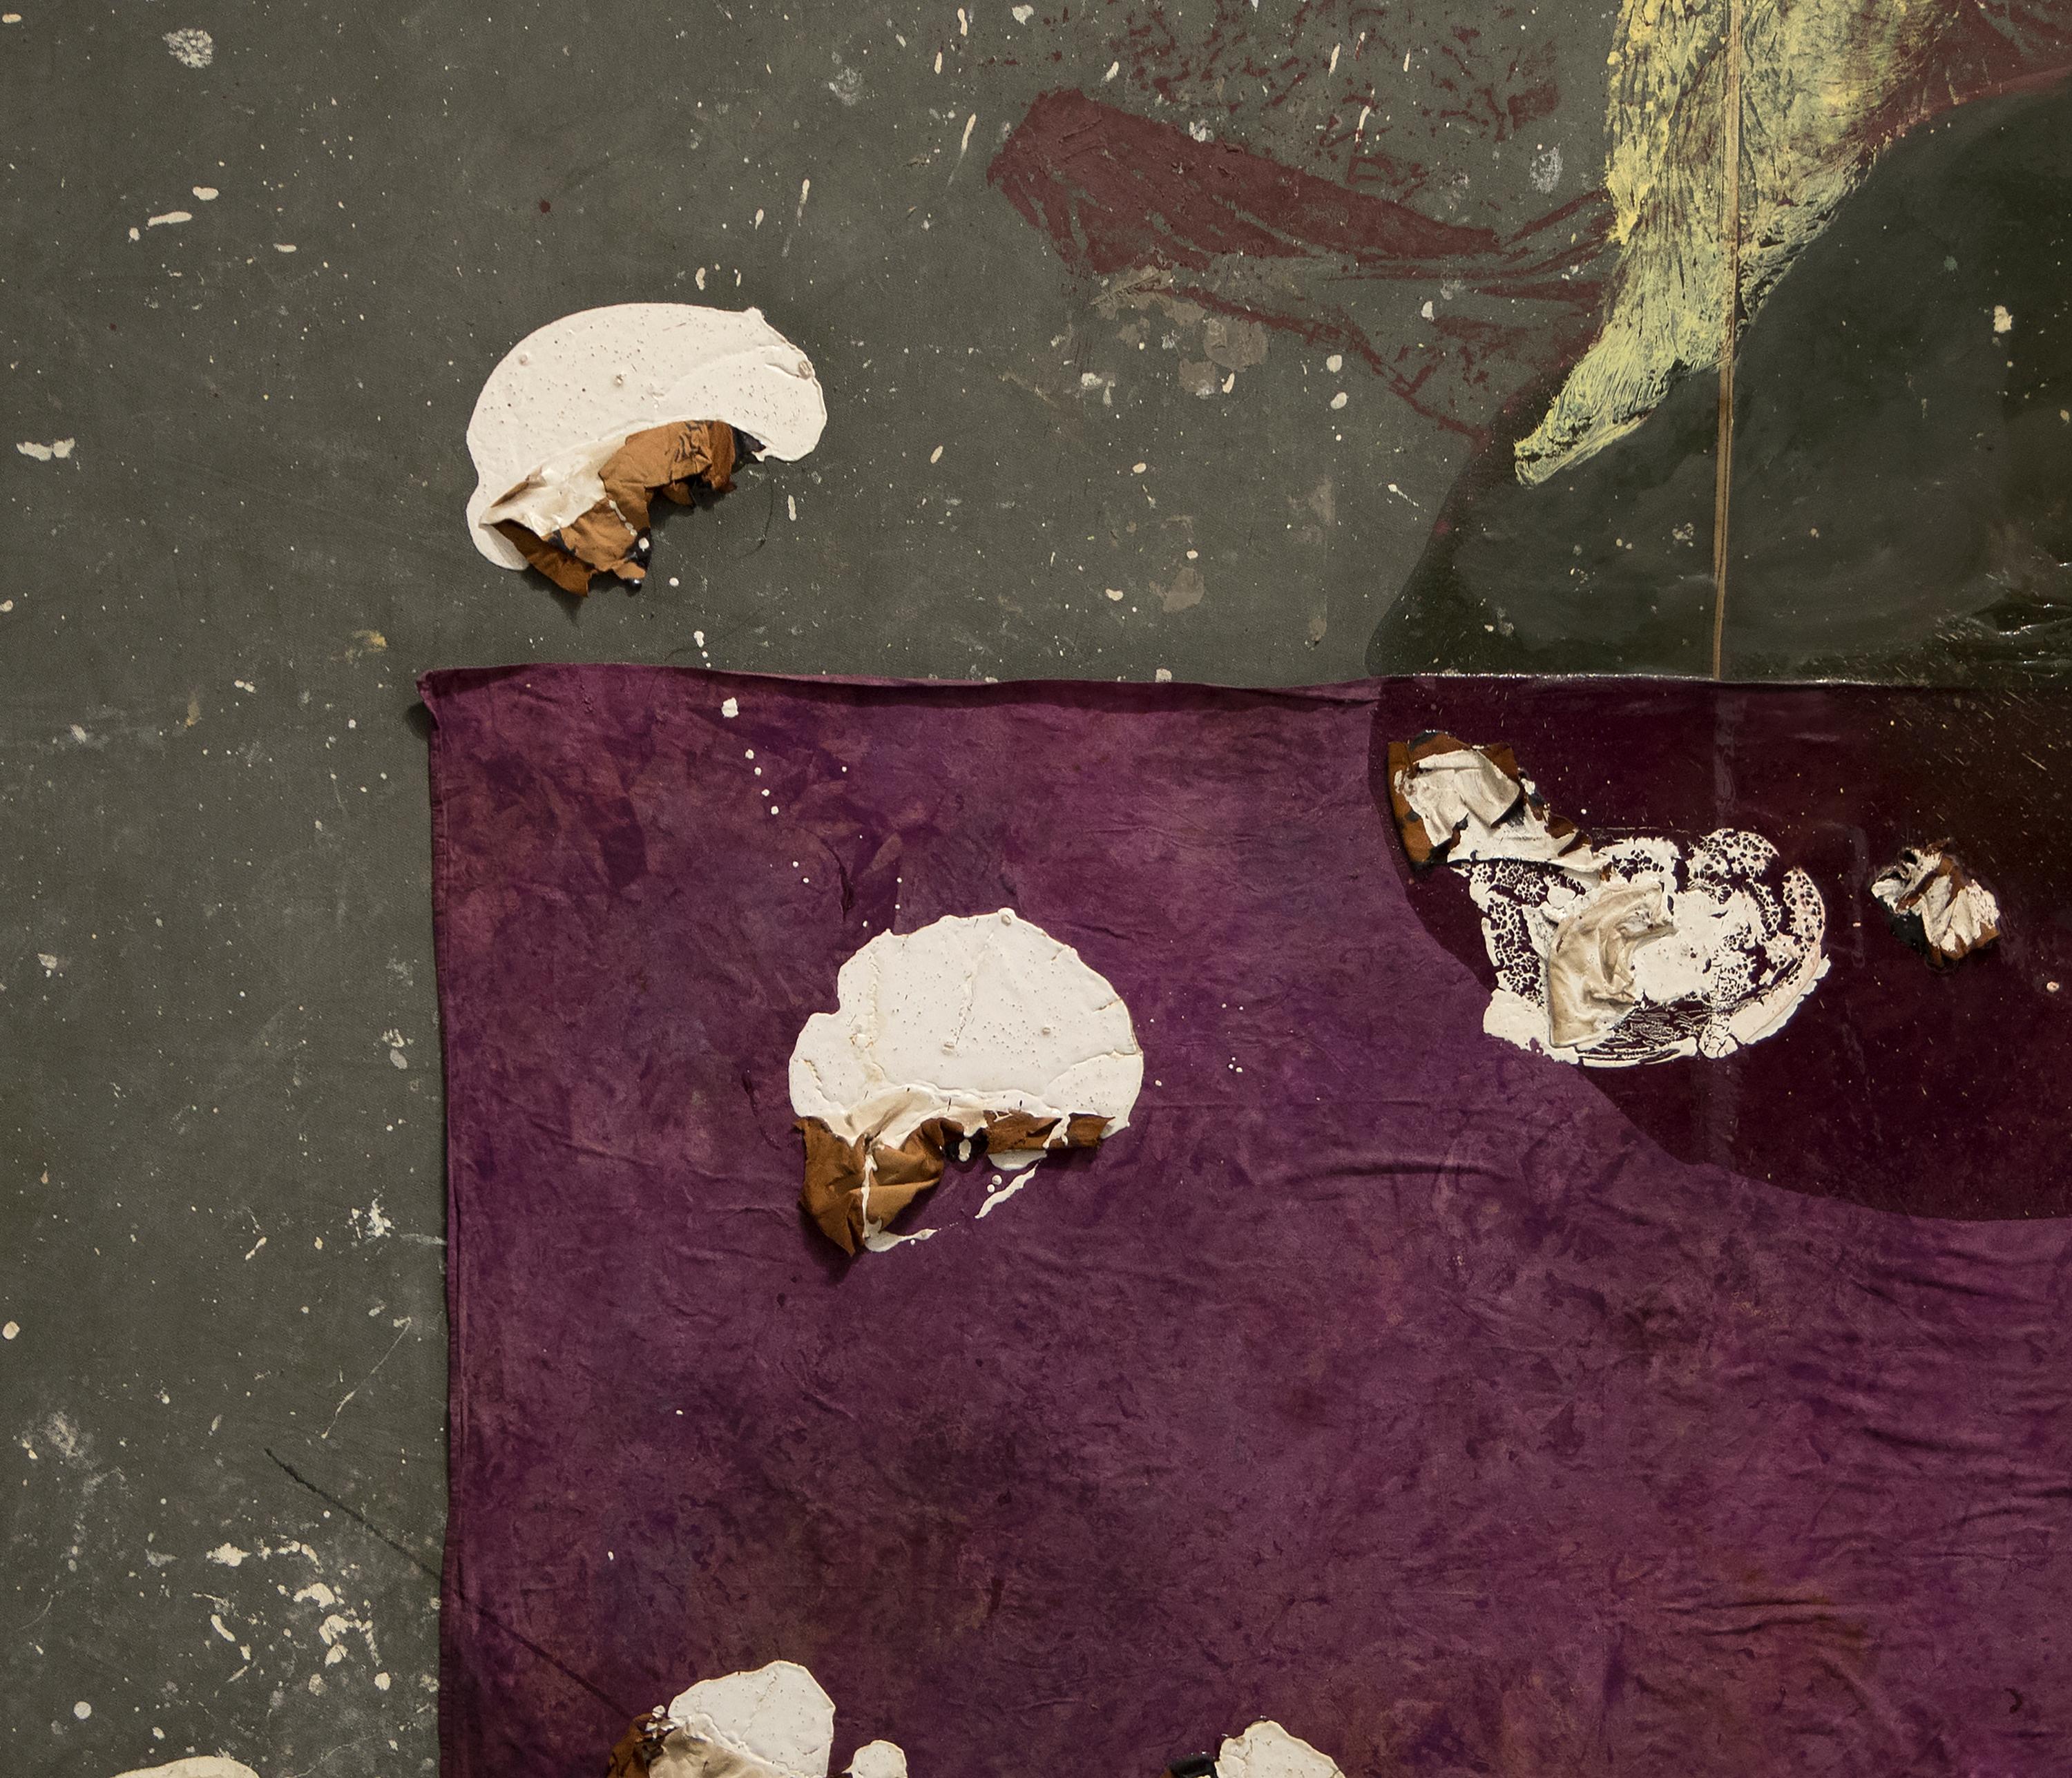 Untitled - Neo-Expressionist Painting by Julian Schnabel